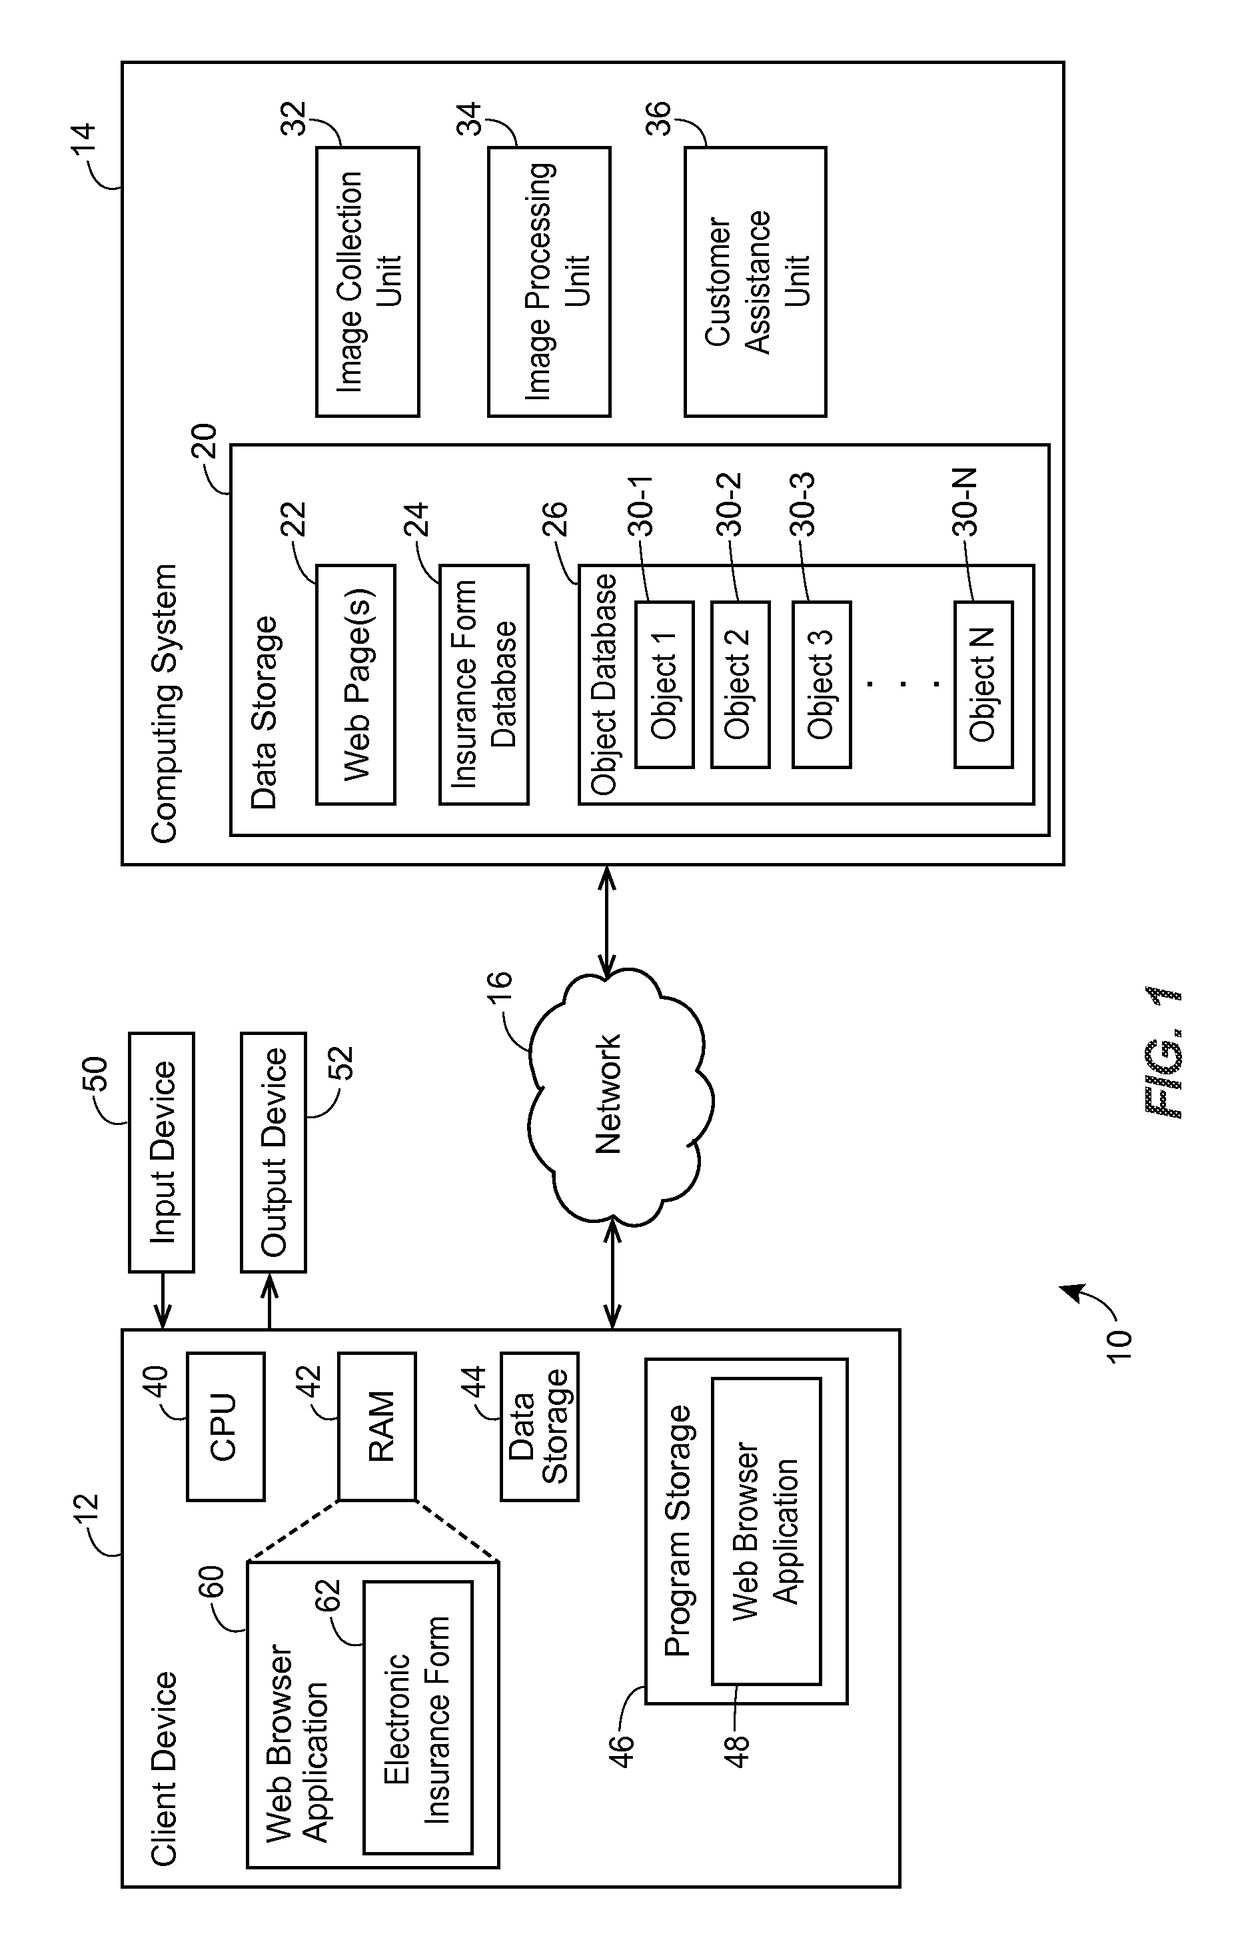 System and method for using object recognition to facilitate the collection of insurance information